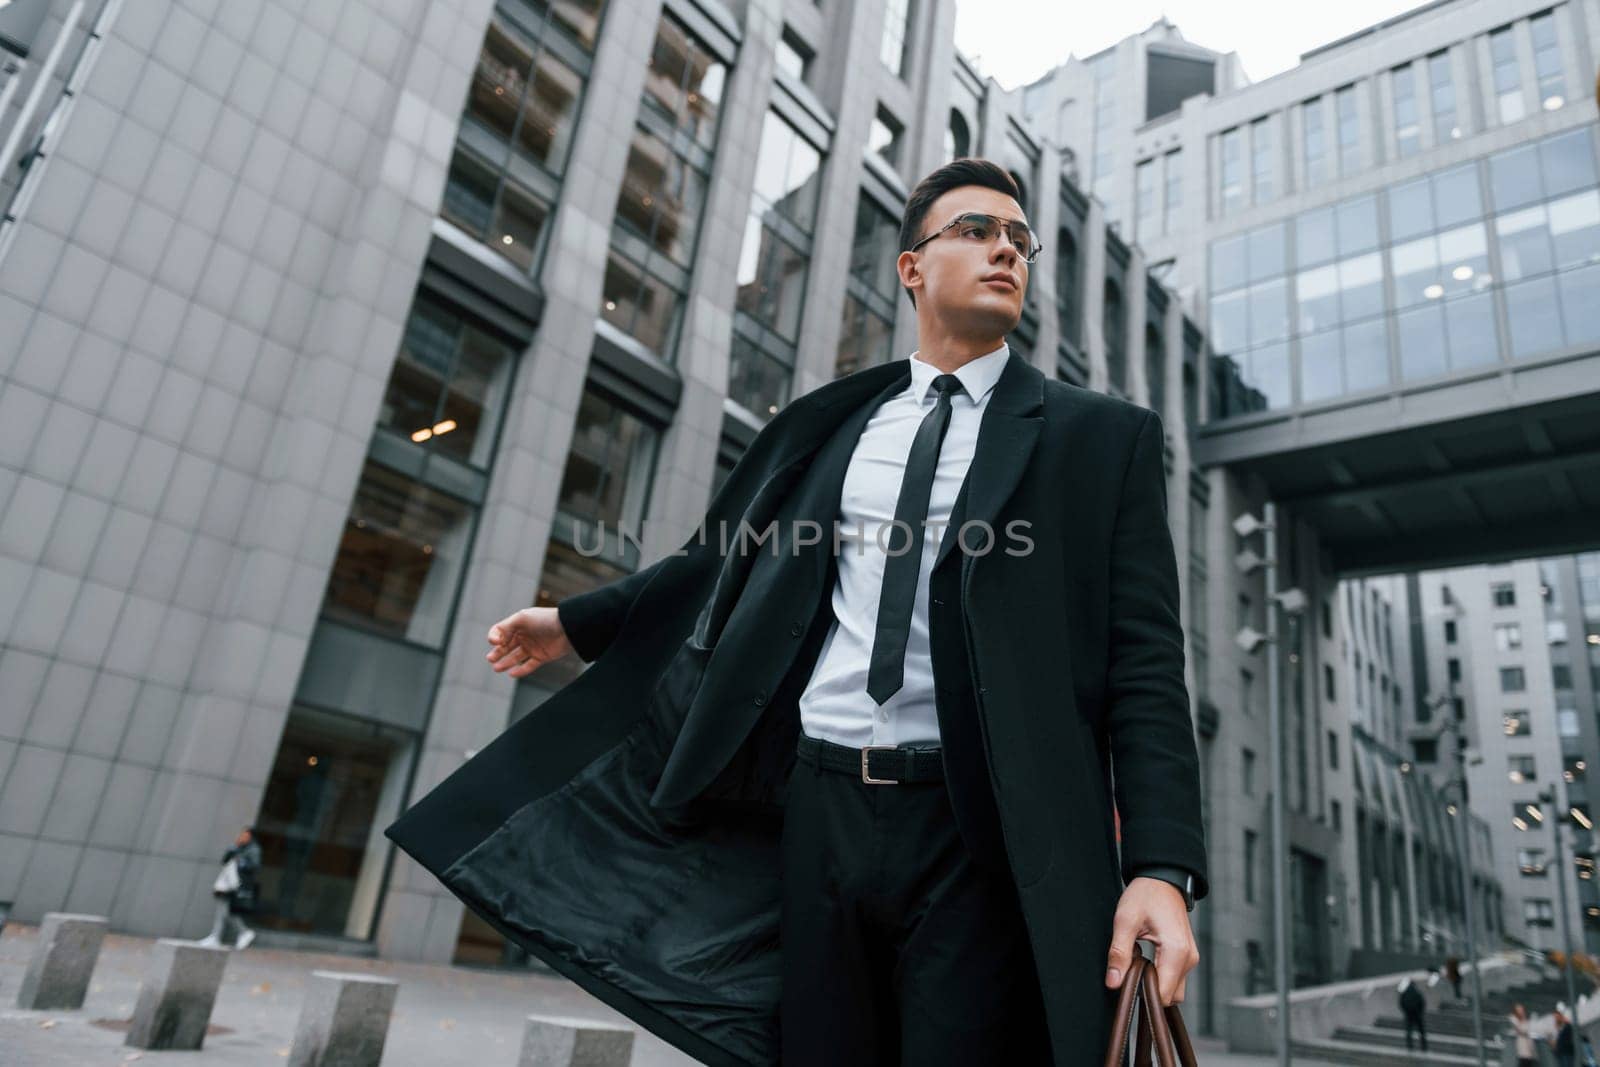 Grey building behind. Businessman in black suit and tie is outdoors in the city by Standret